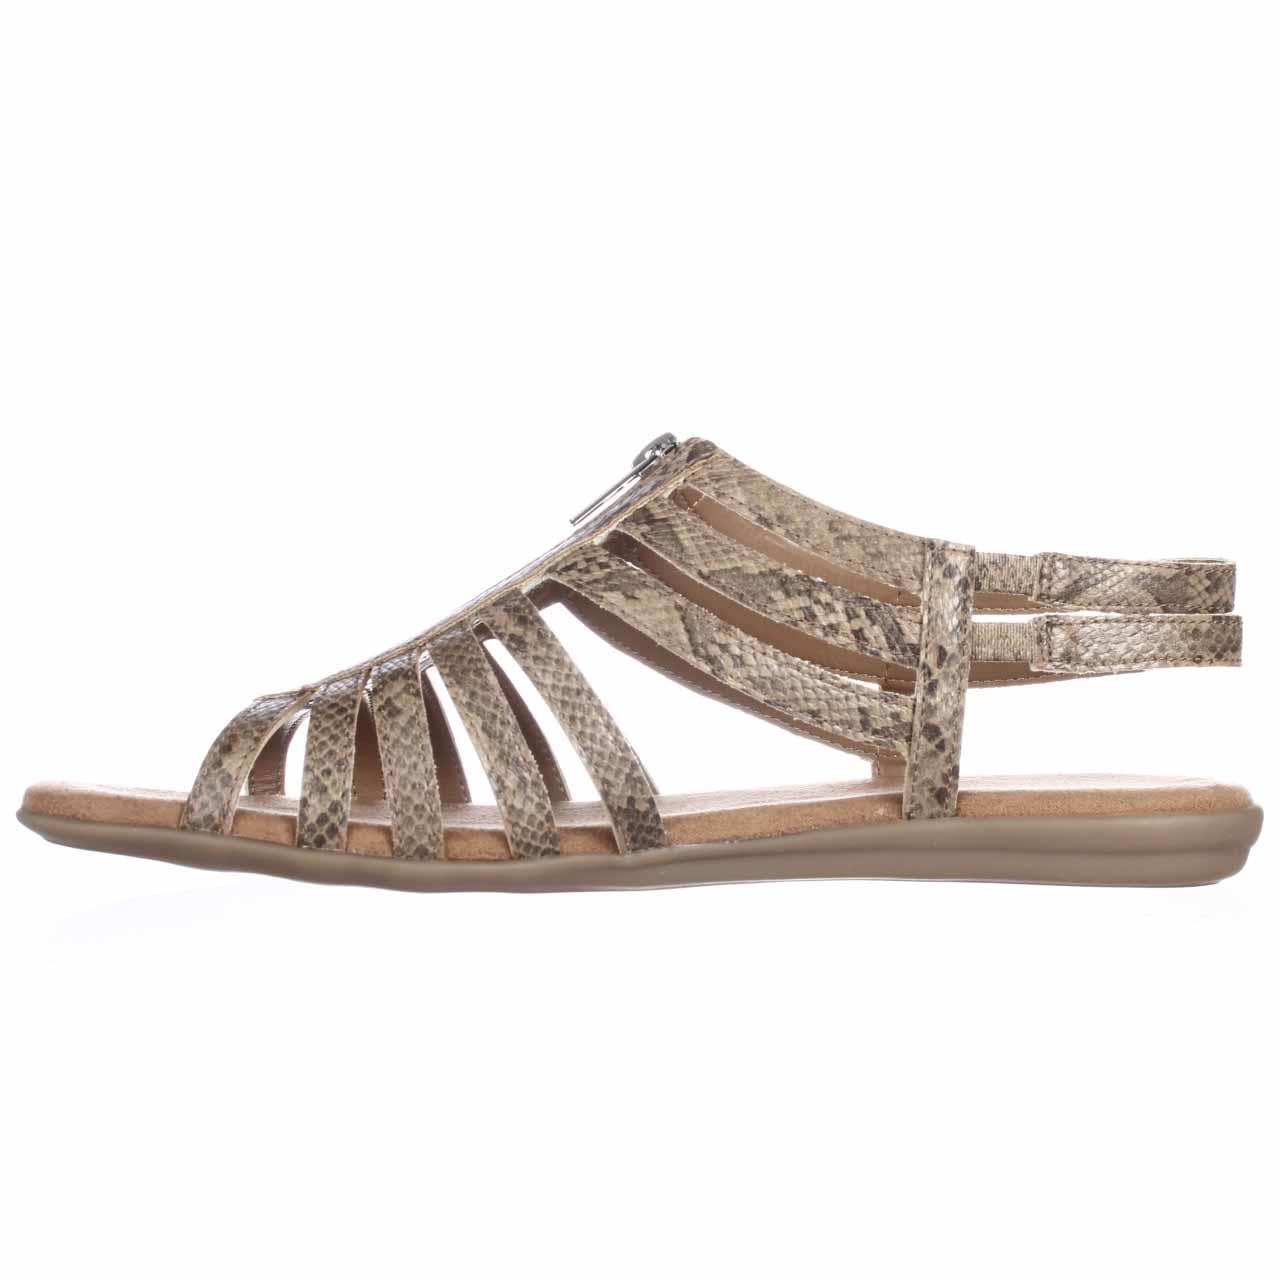 Aerosoles Synthetic Chlothesline Huarache Strappy Sandals in Brown - Lyst